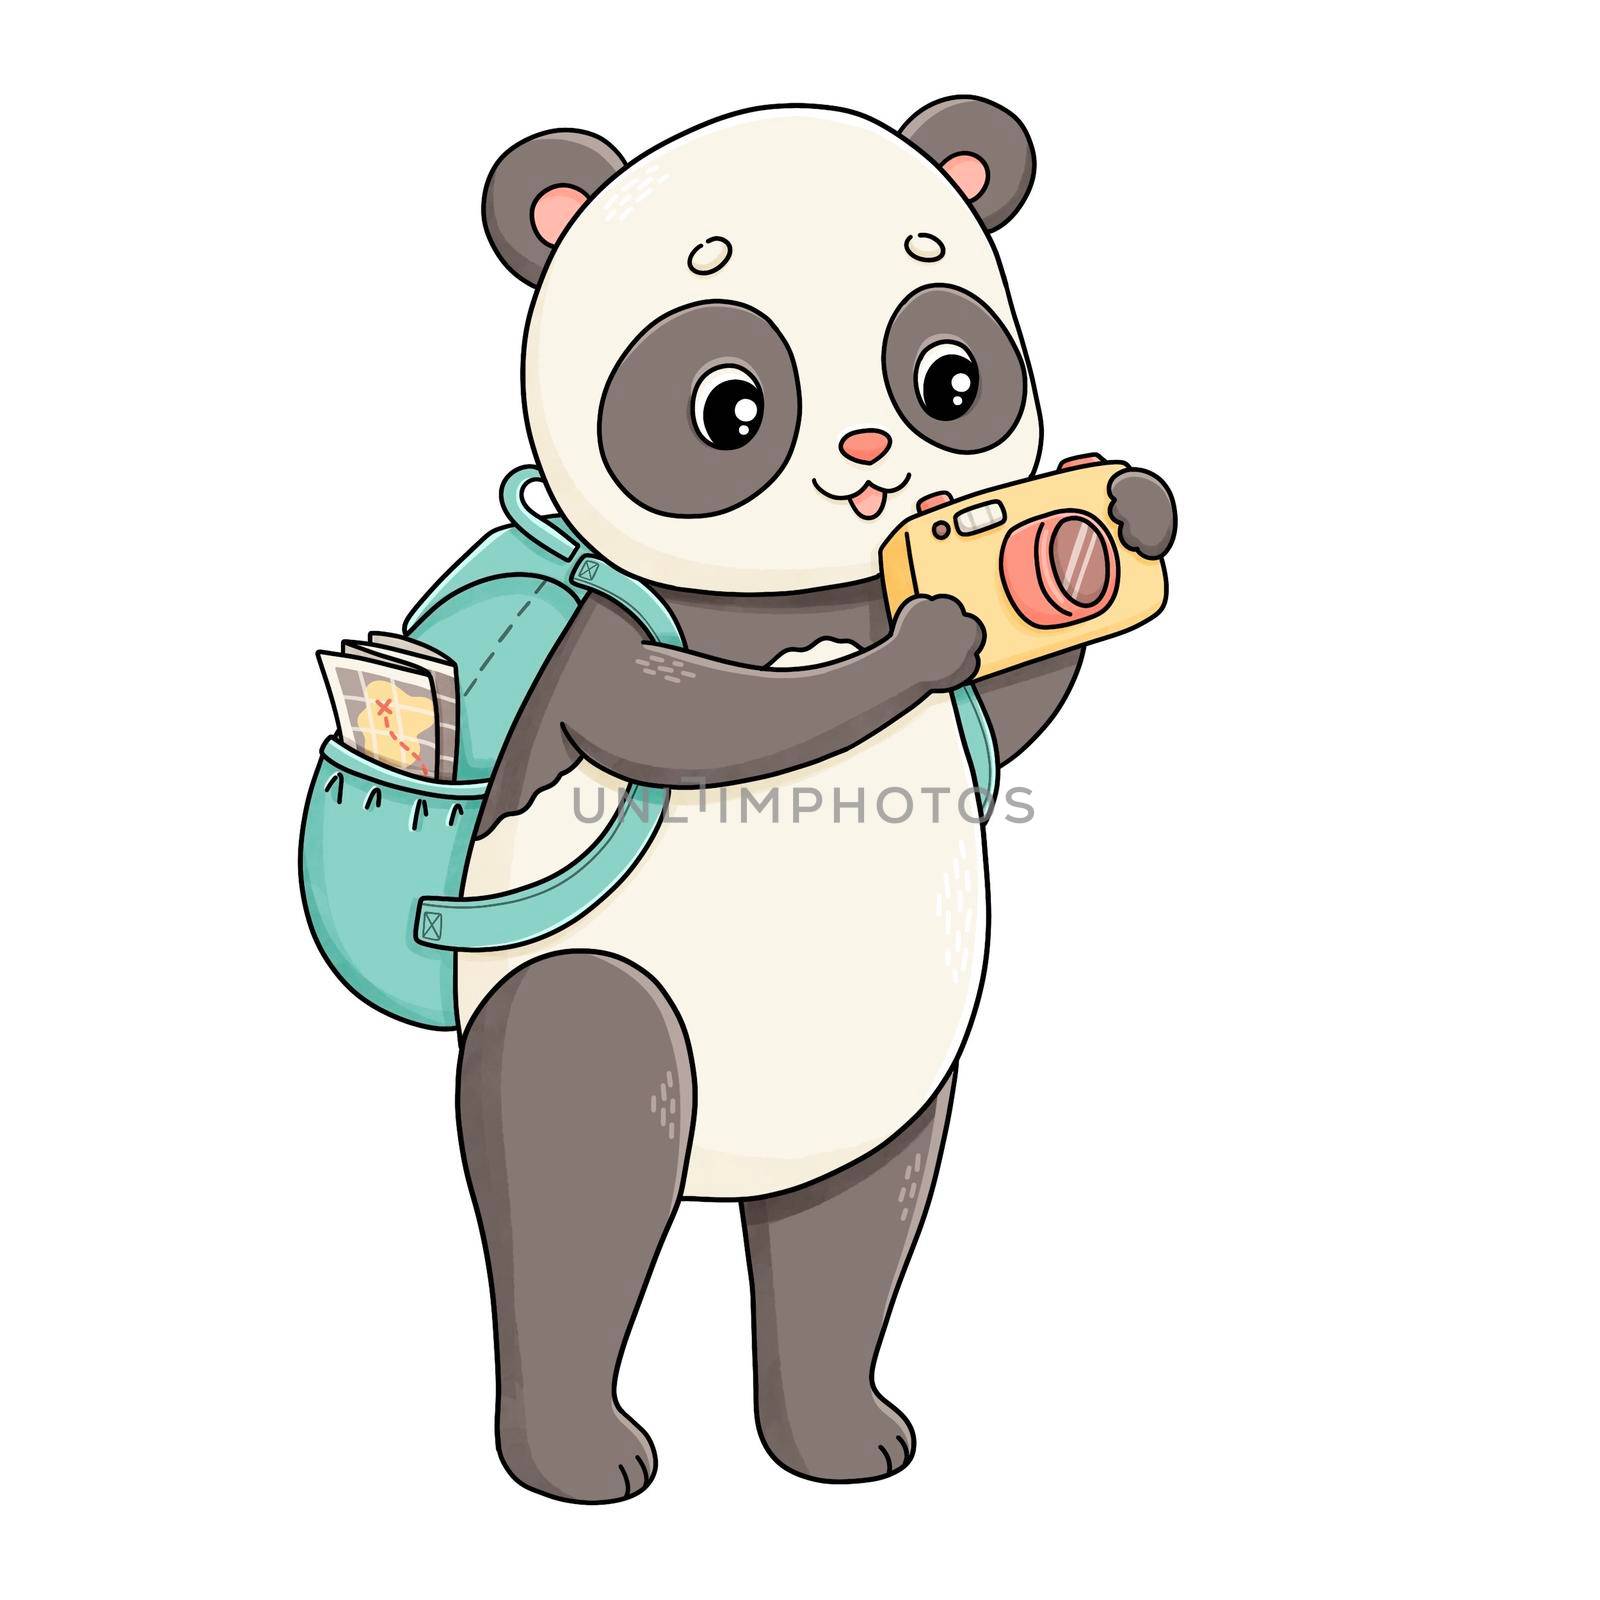 Summer time panda with camera and backpack map illustration